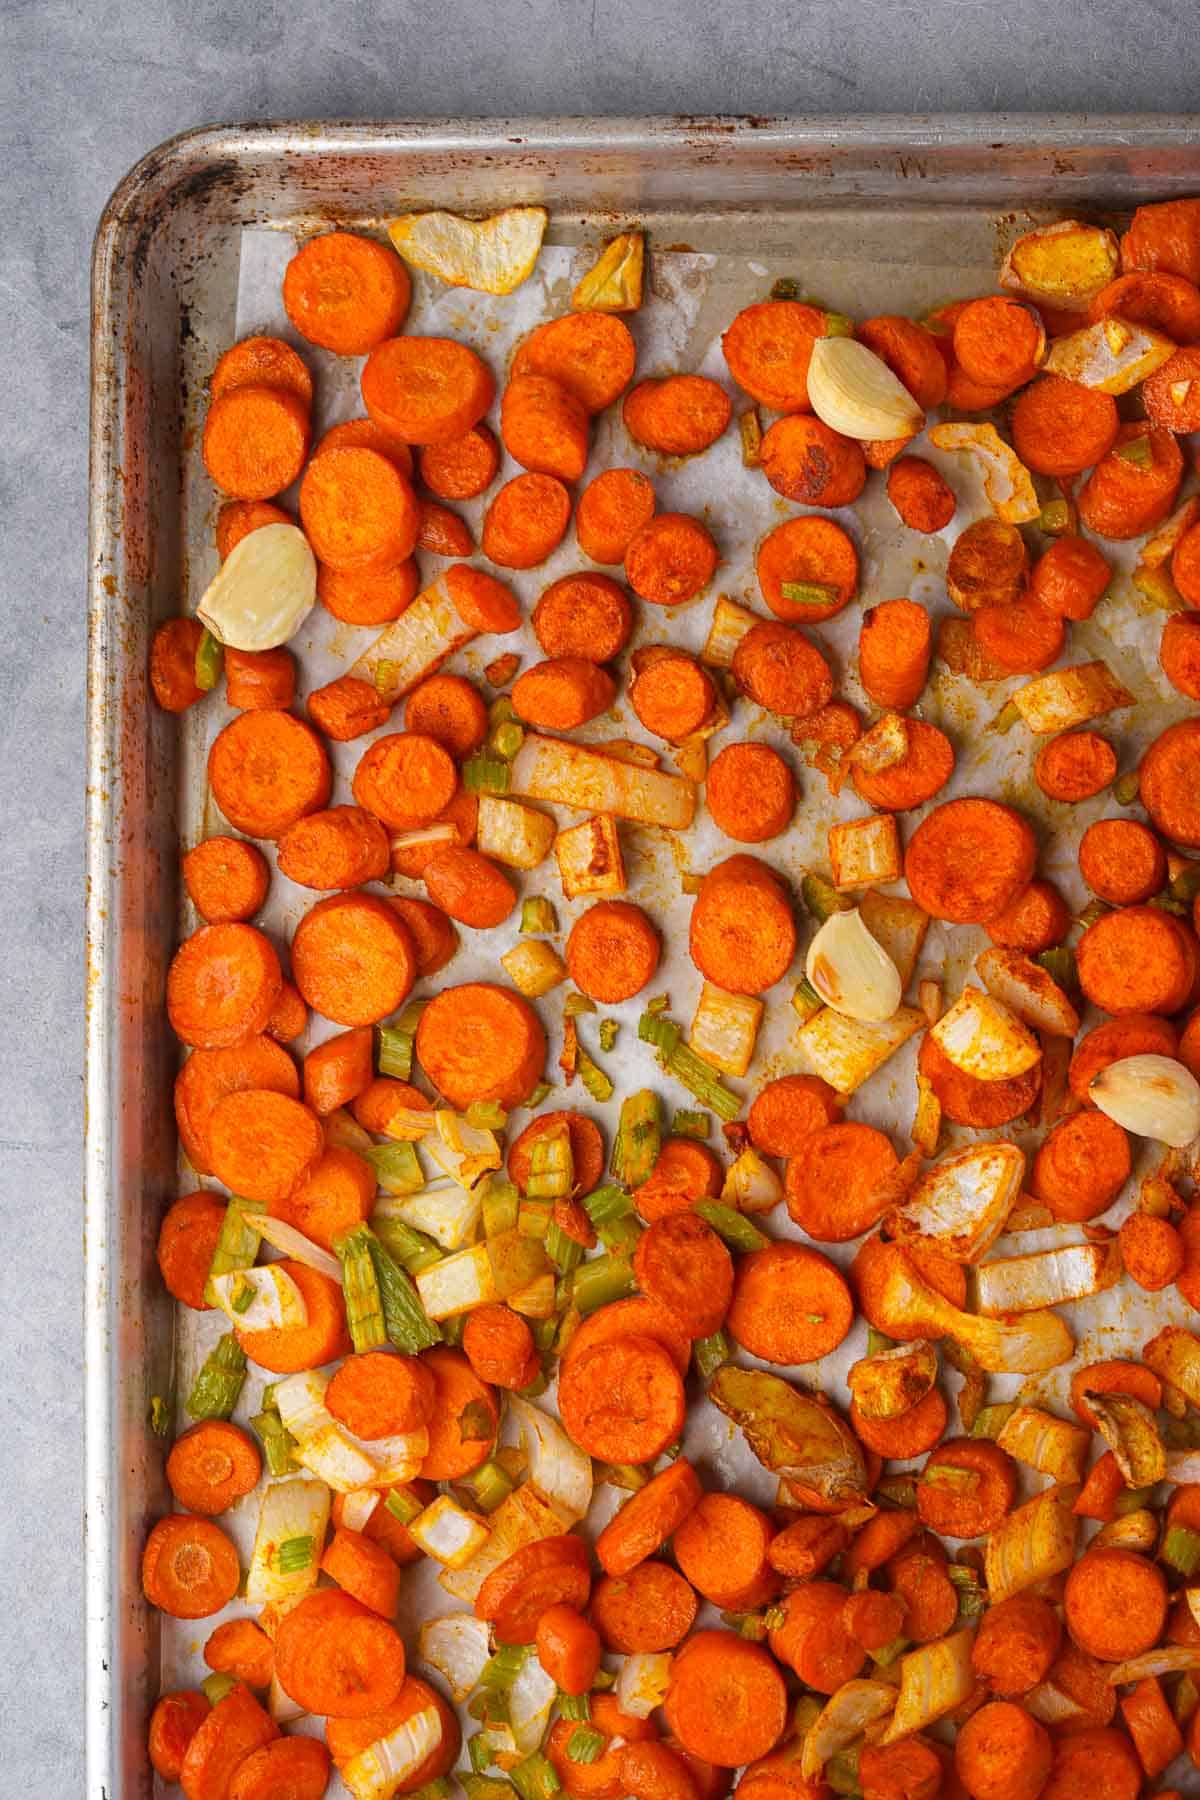 Roasted celery, garlic, ginger, carrots and onions on a baking sheet.